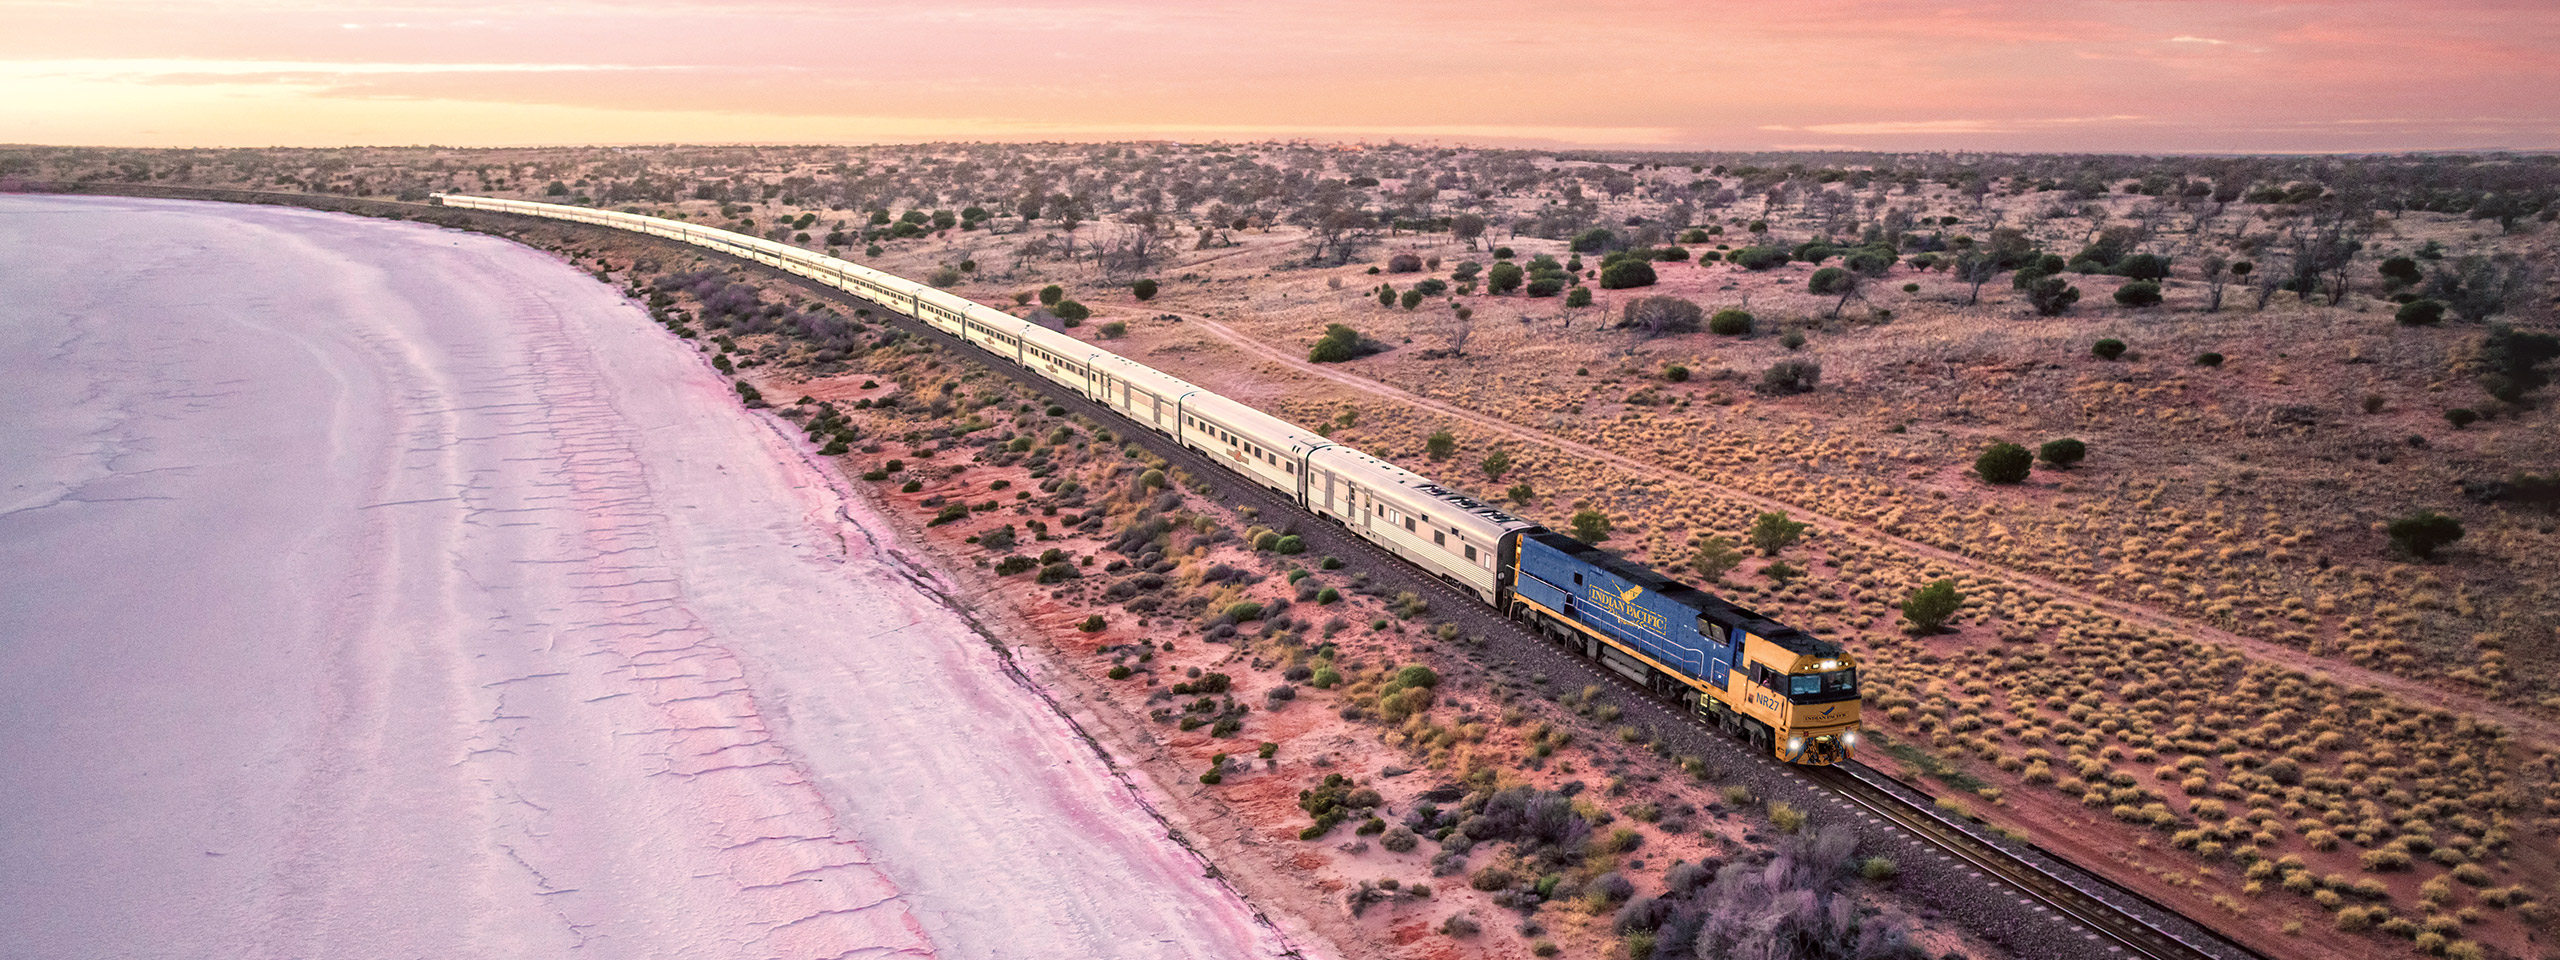 Indian Pacific